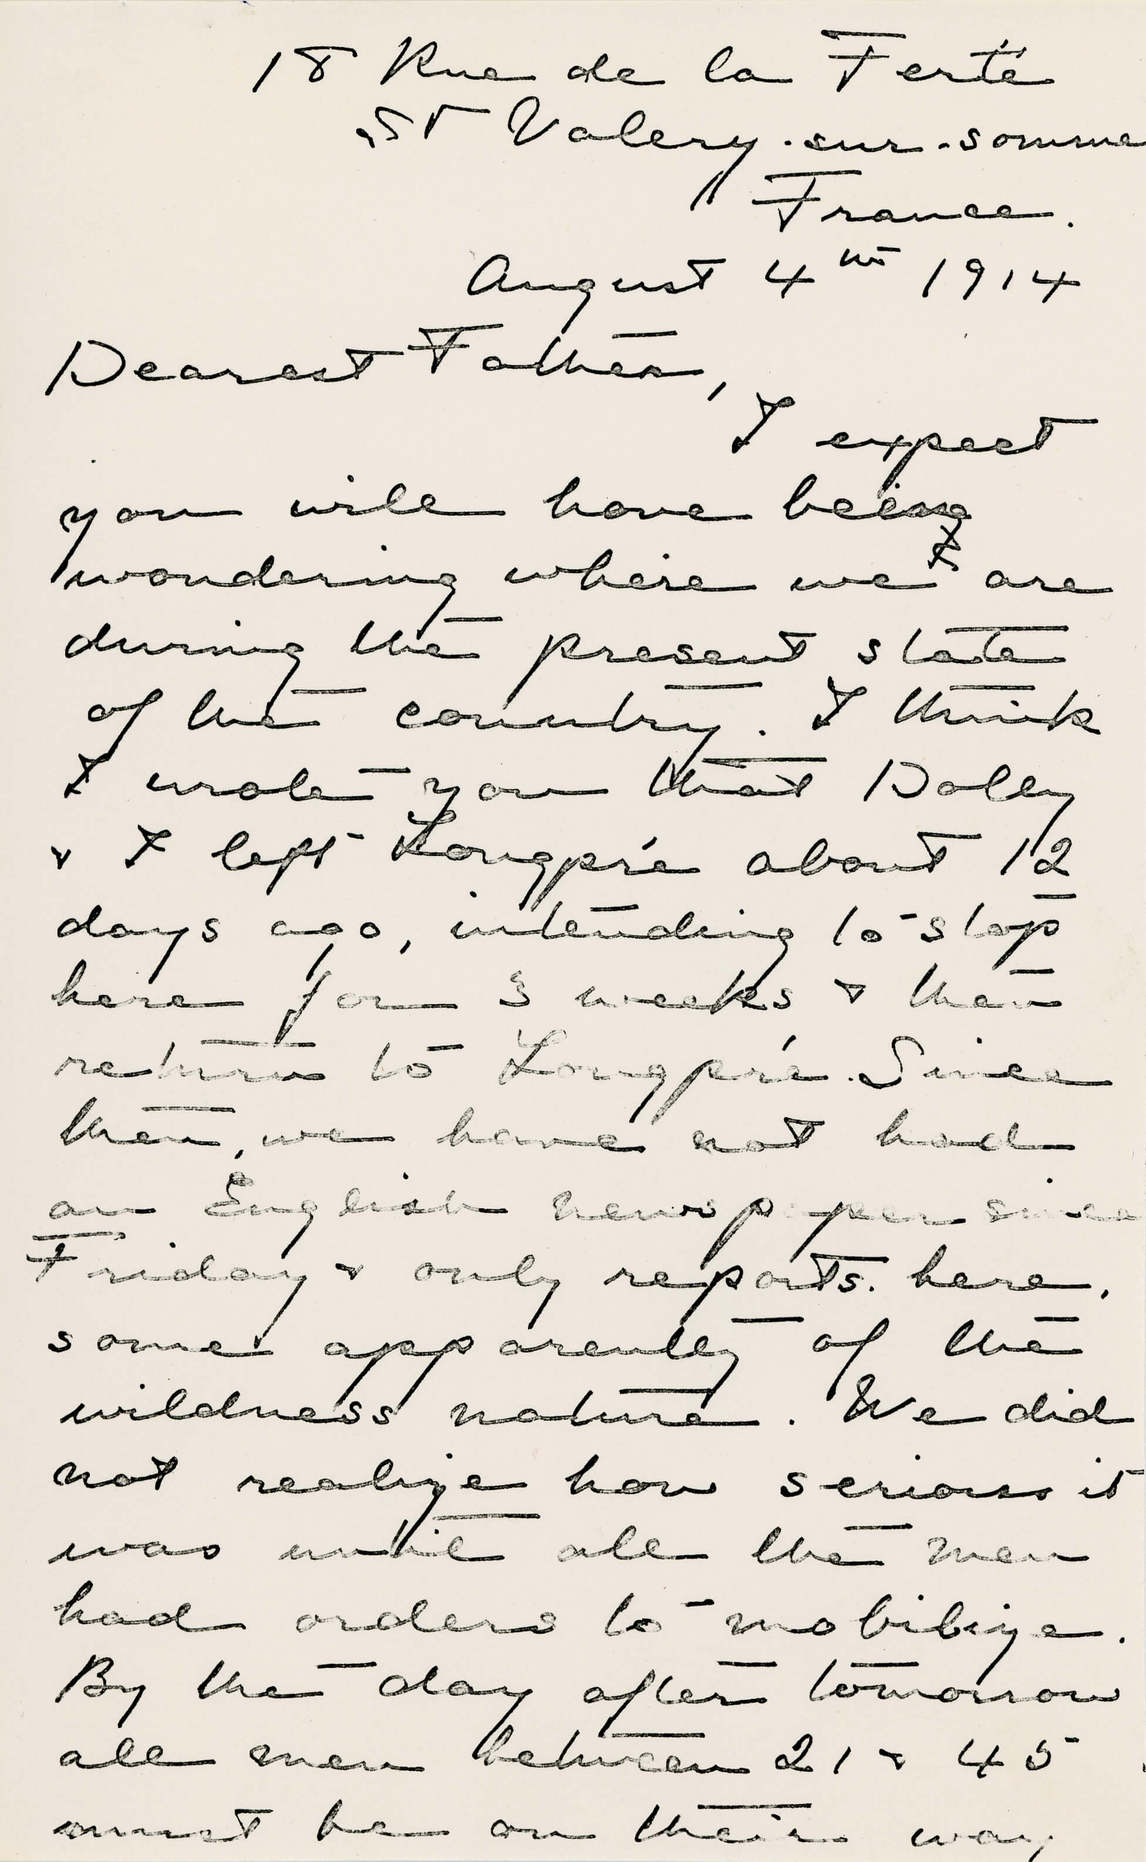 McNicoll’s letter from France, 1914, Helen McNicoll